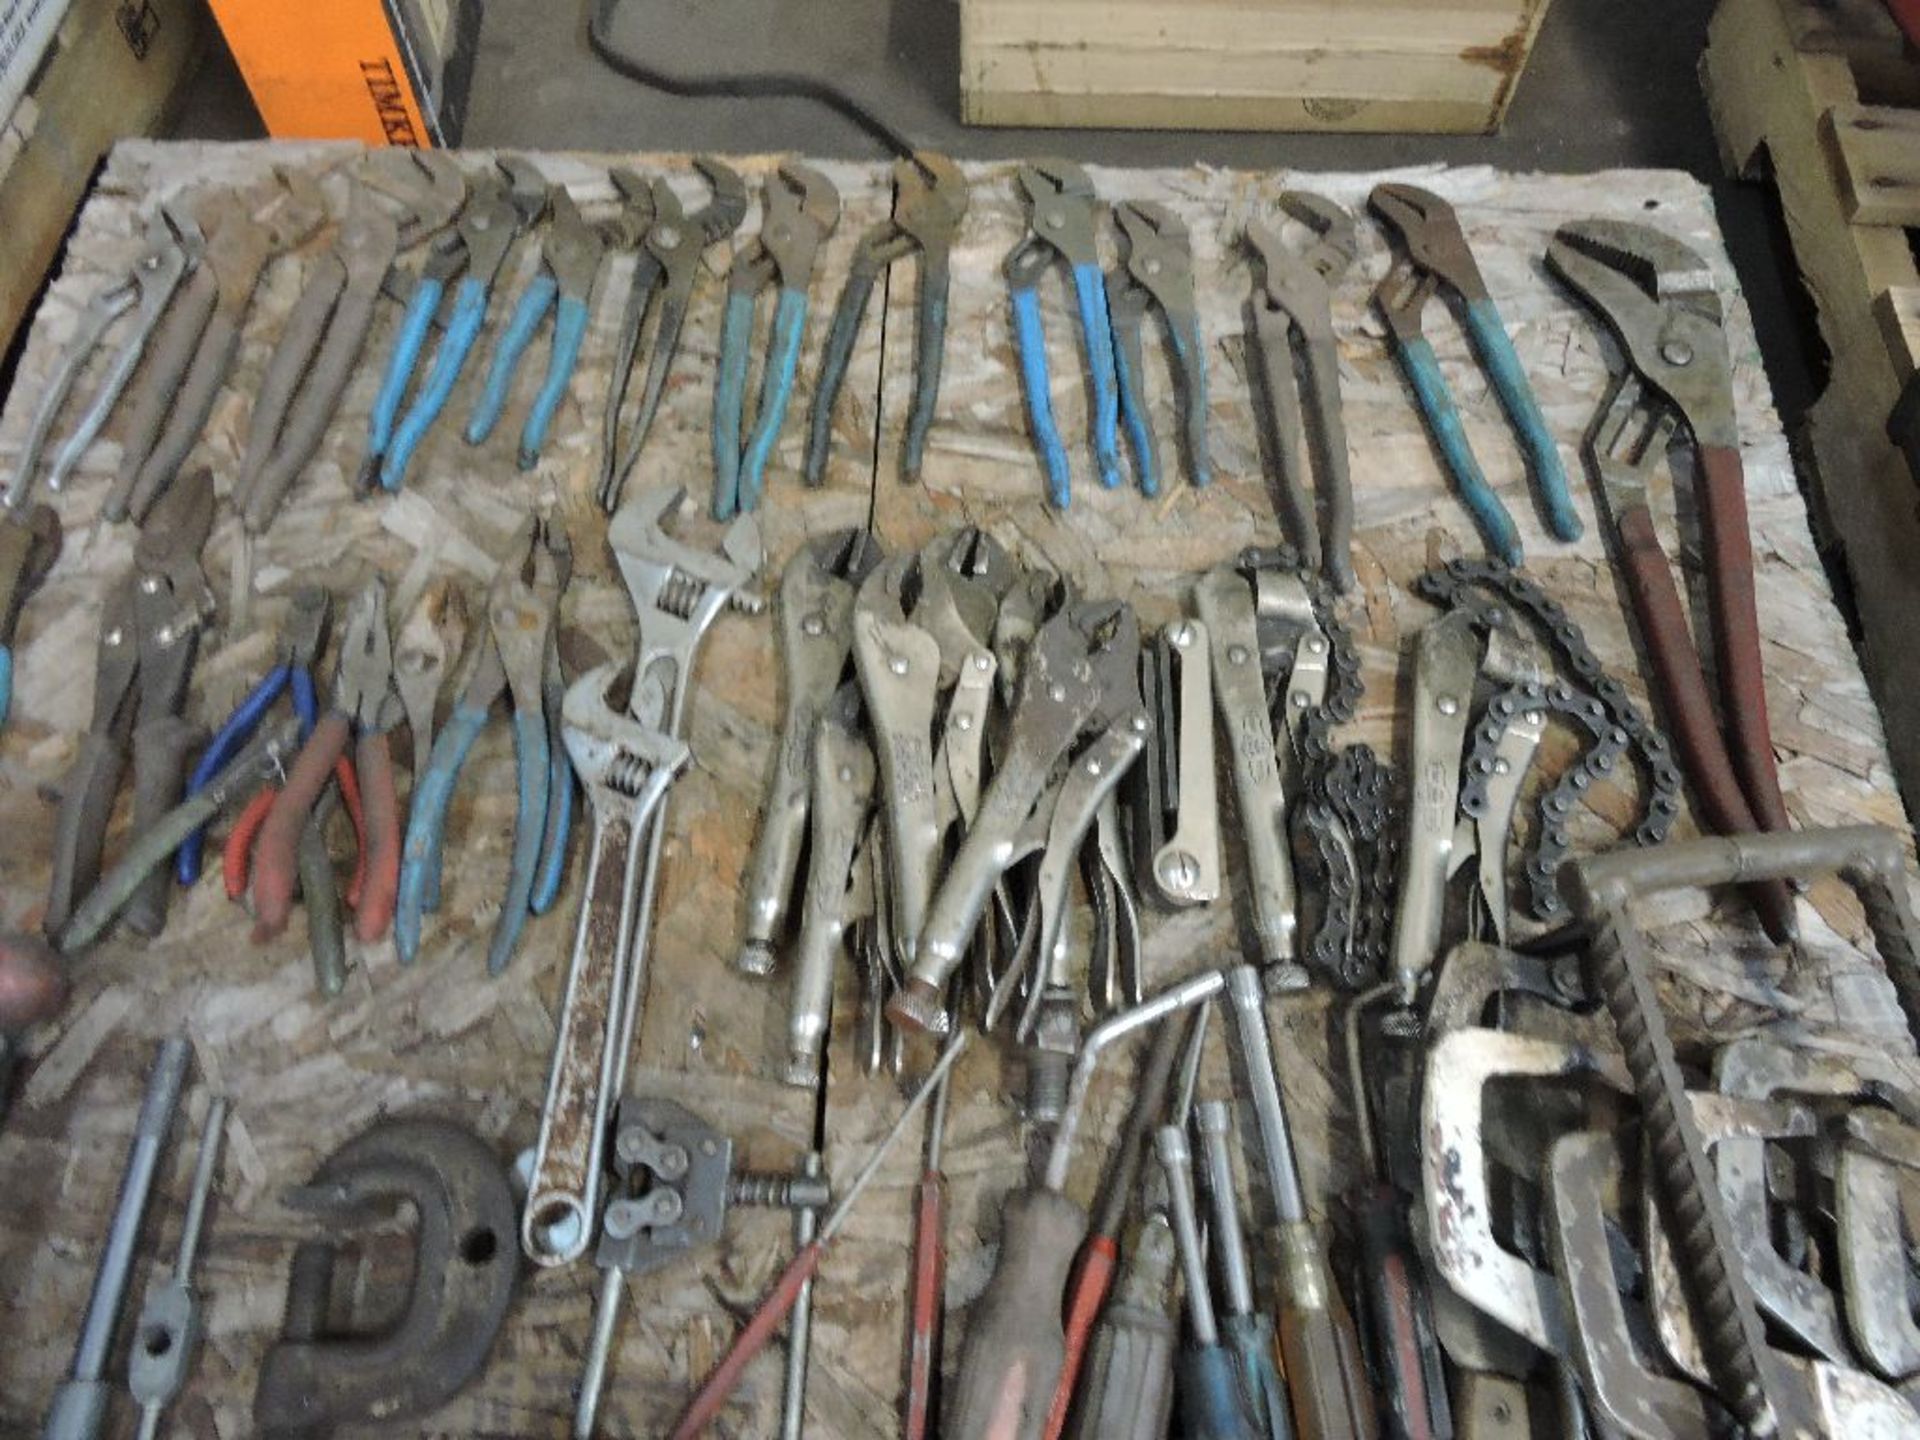 Pallet pliers, vise grips, hack saws, wrenches, drivers. - Image 2 of 4